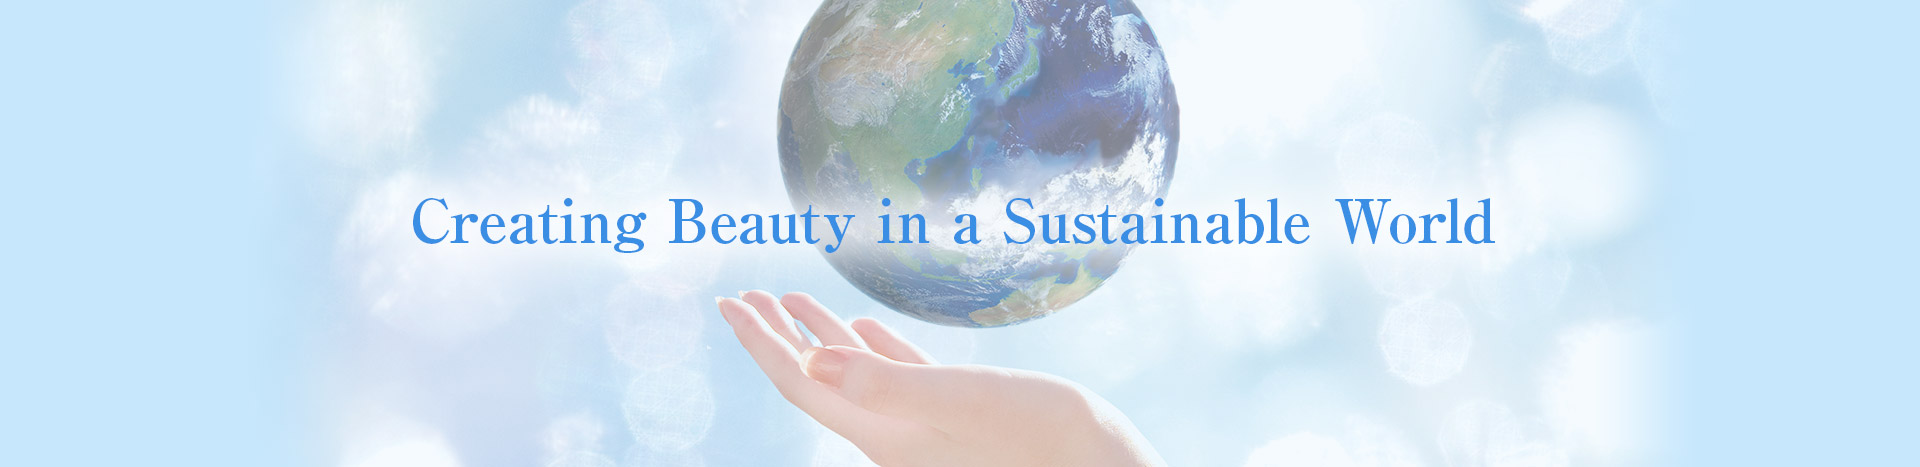 Creating Beauty in a Sustainable World